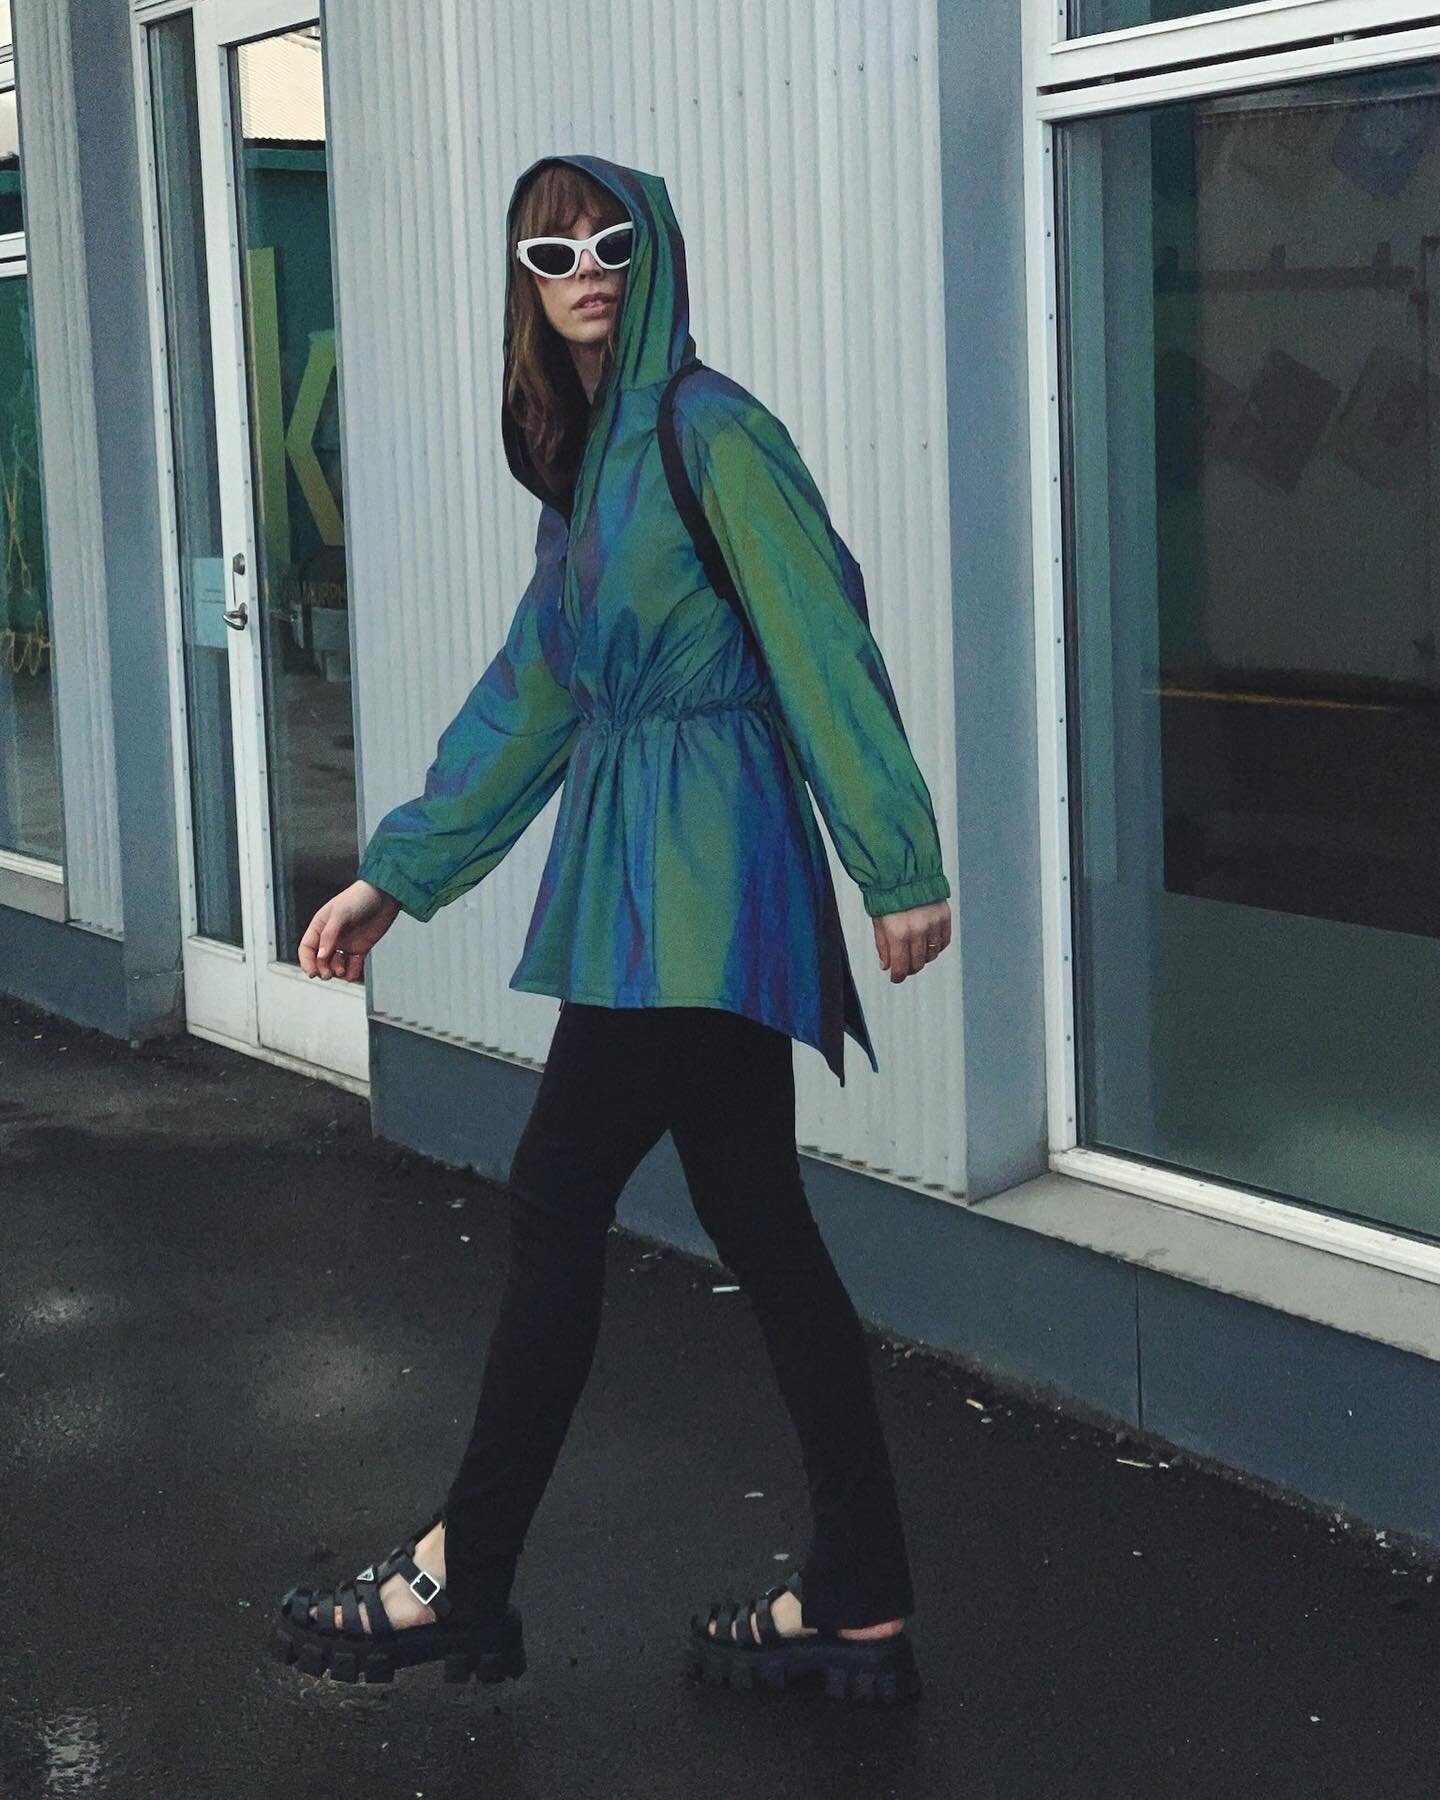 Catch Me If You Can. Turn heads in our 100% water repellant, 100% chic Northern Lightswear reflective rainwear. 
.
.
.
.
.
.
.
.
.
.
.
.
#shearling #fashion #iceland #sustainablefashion #wintercoat #scandinavian #custom #canadianmade #iceland #travel